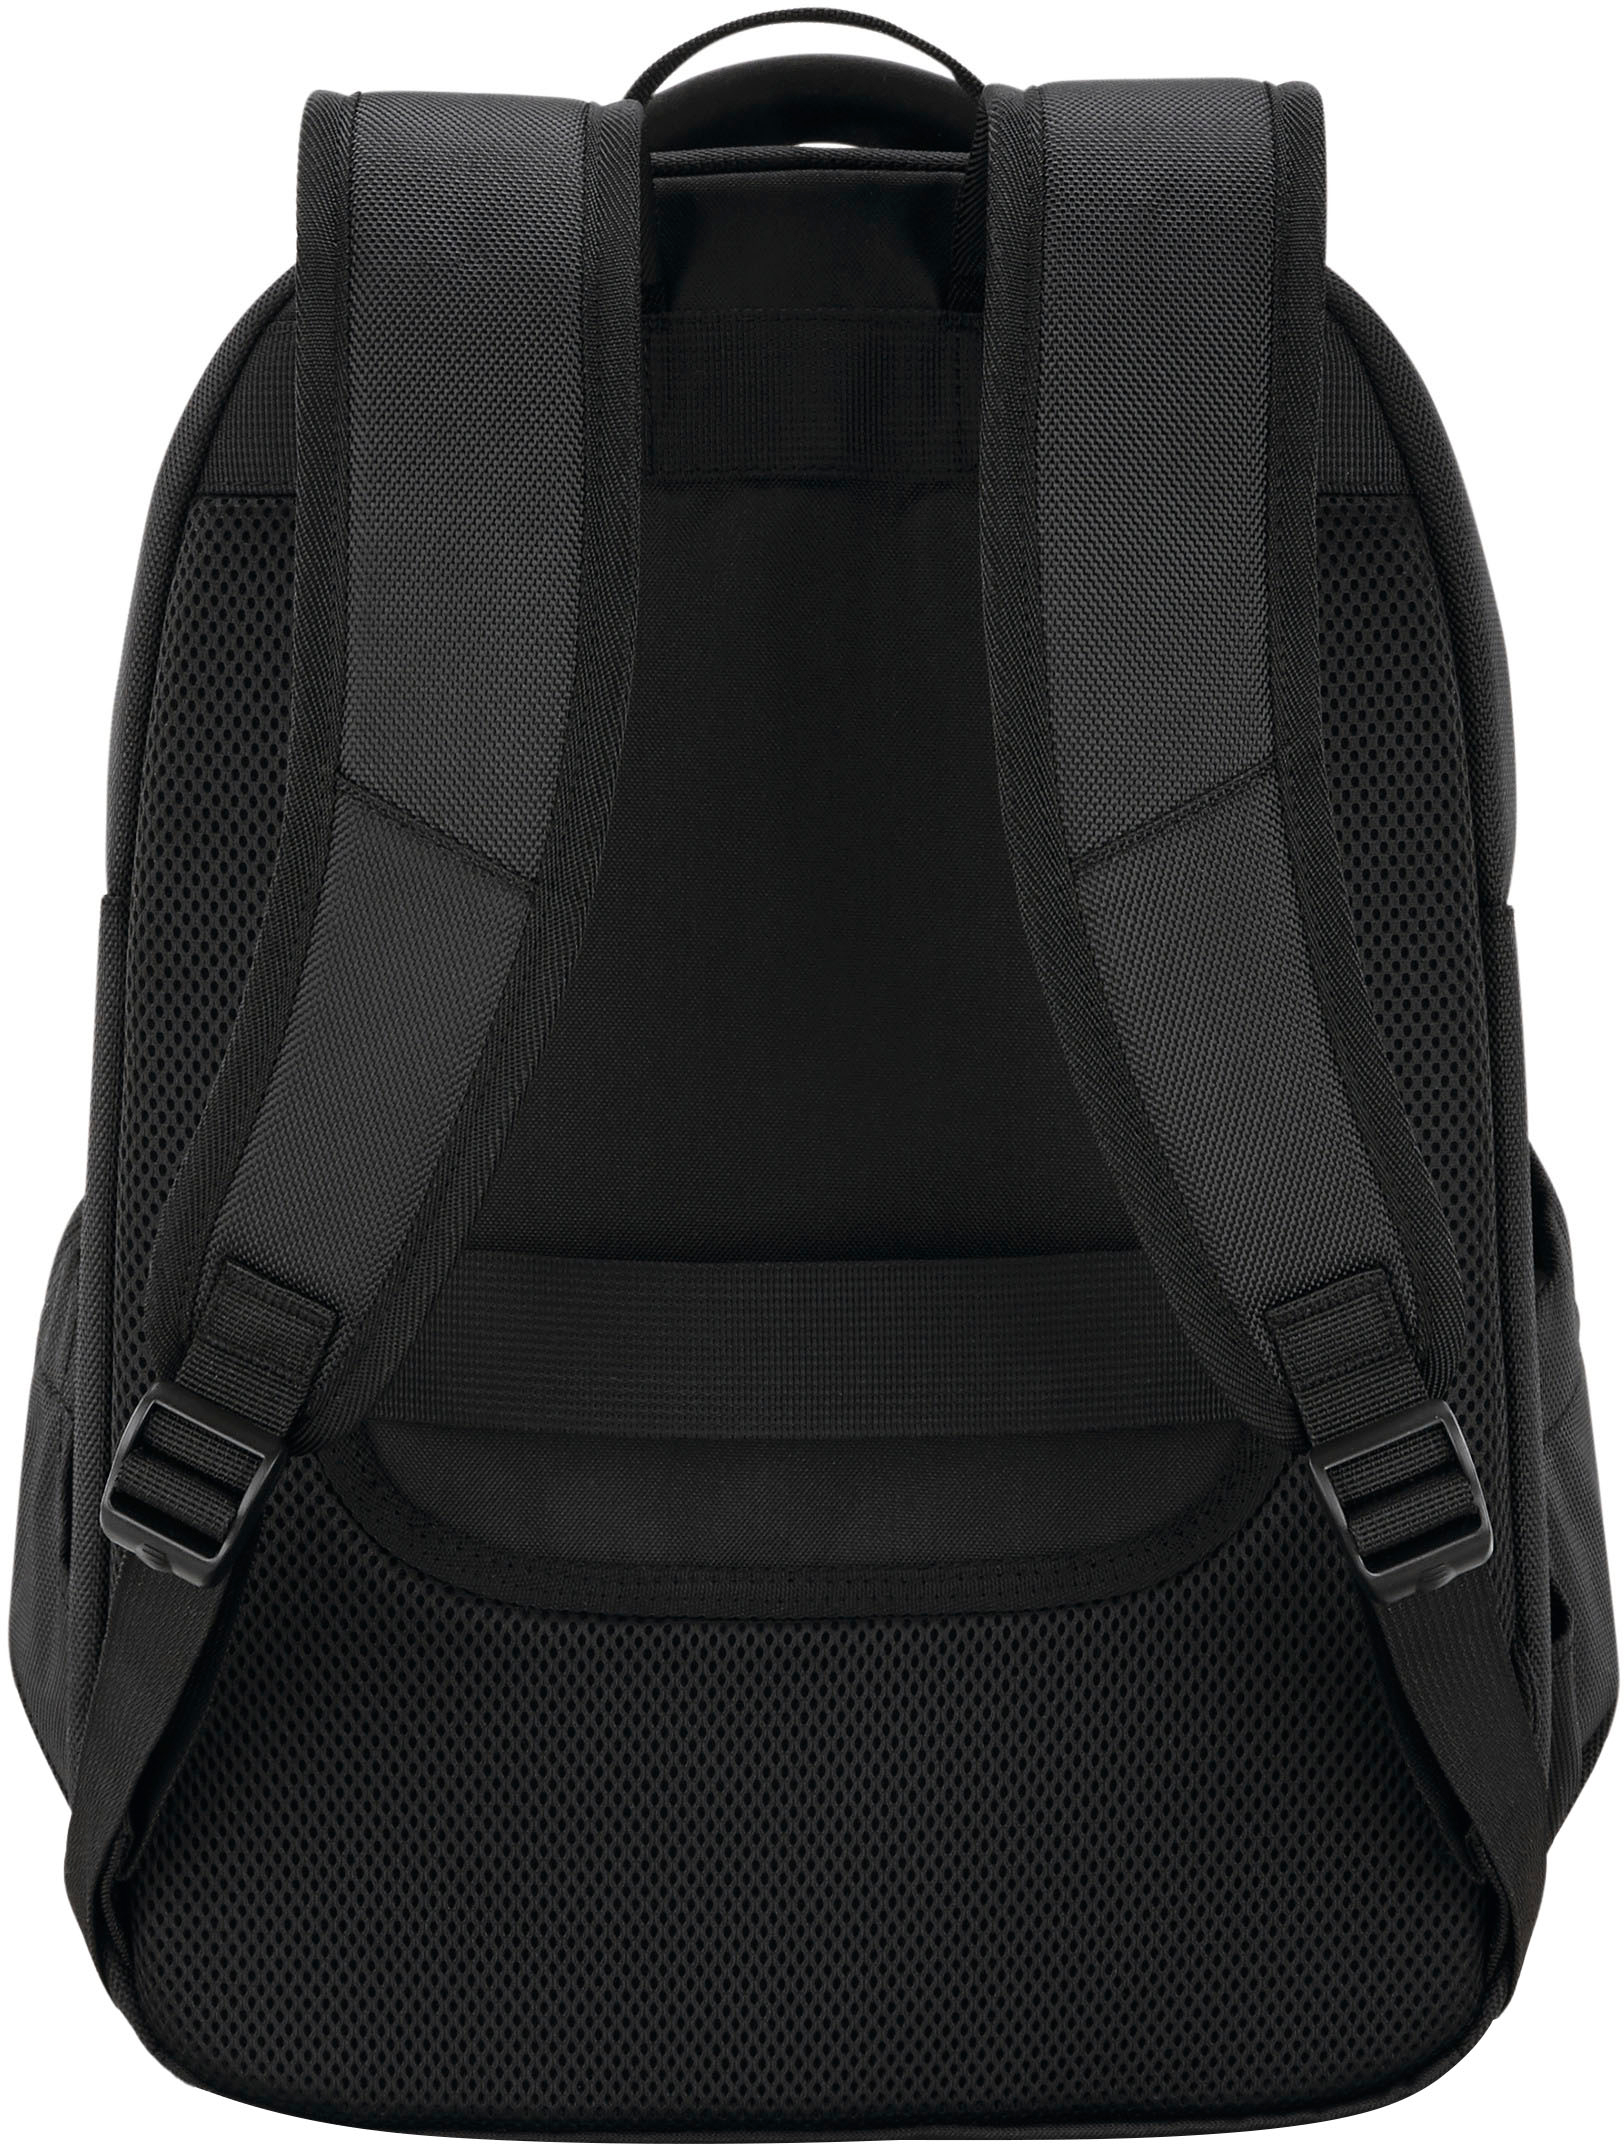 Back View: Thule - Construct Backpack for 15.6" laptop and 10.1" table - Black